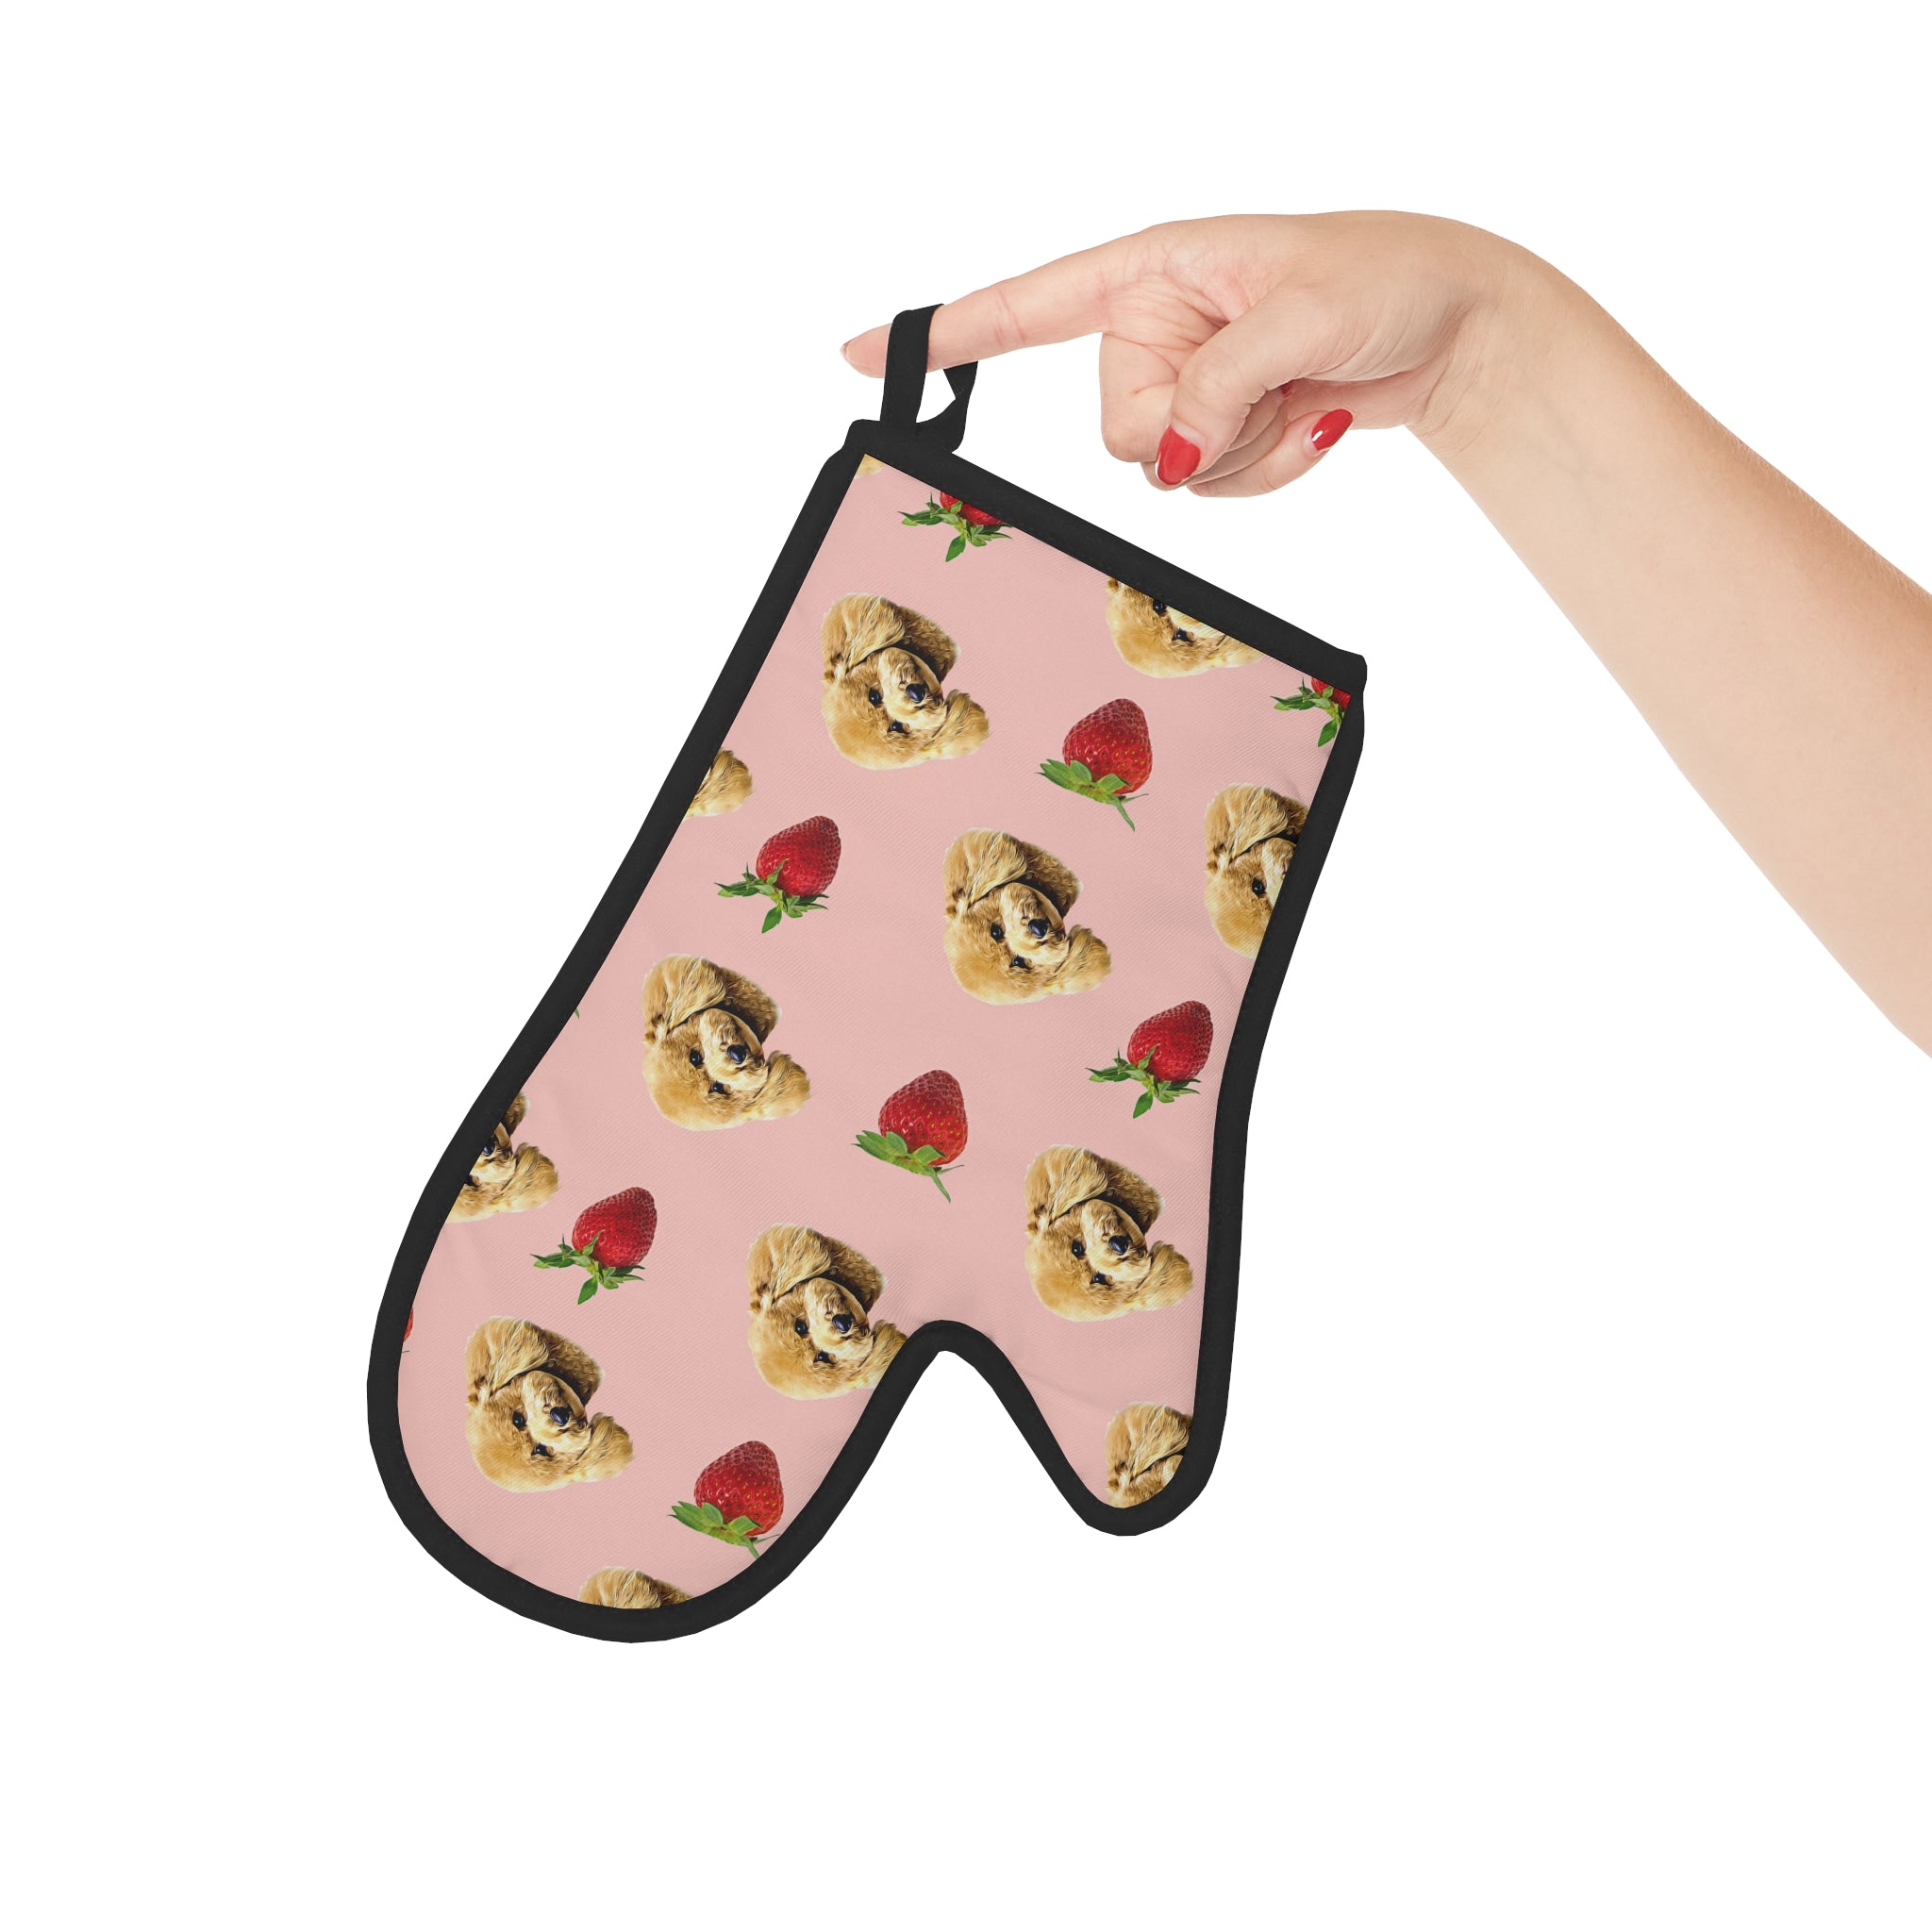 Personalized Oven Mitts